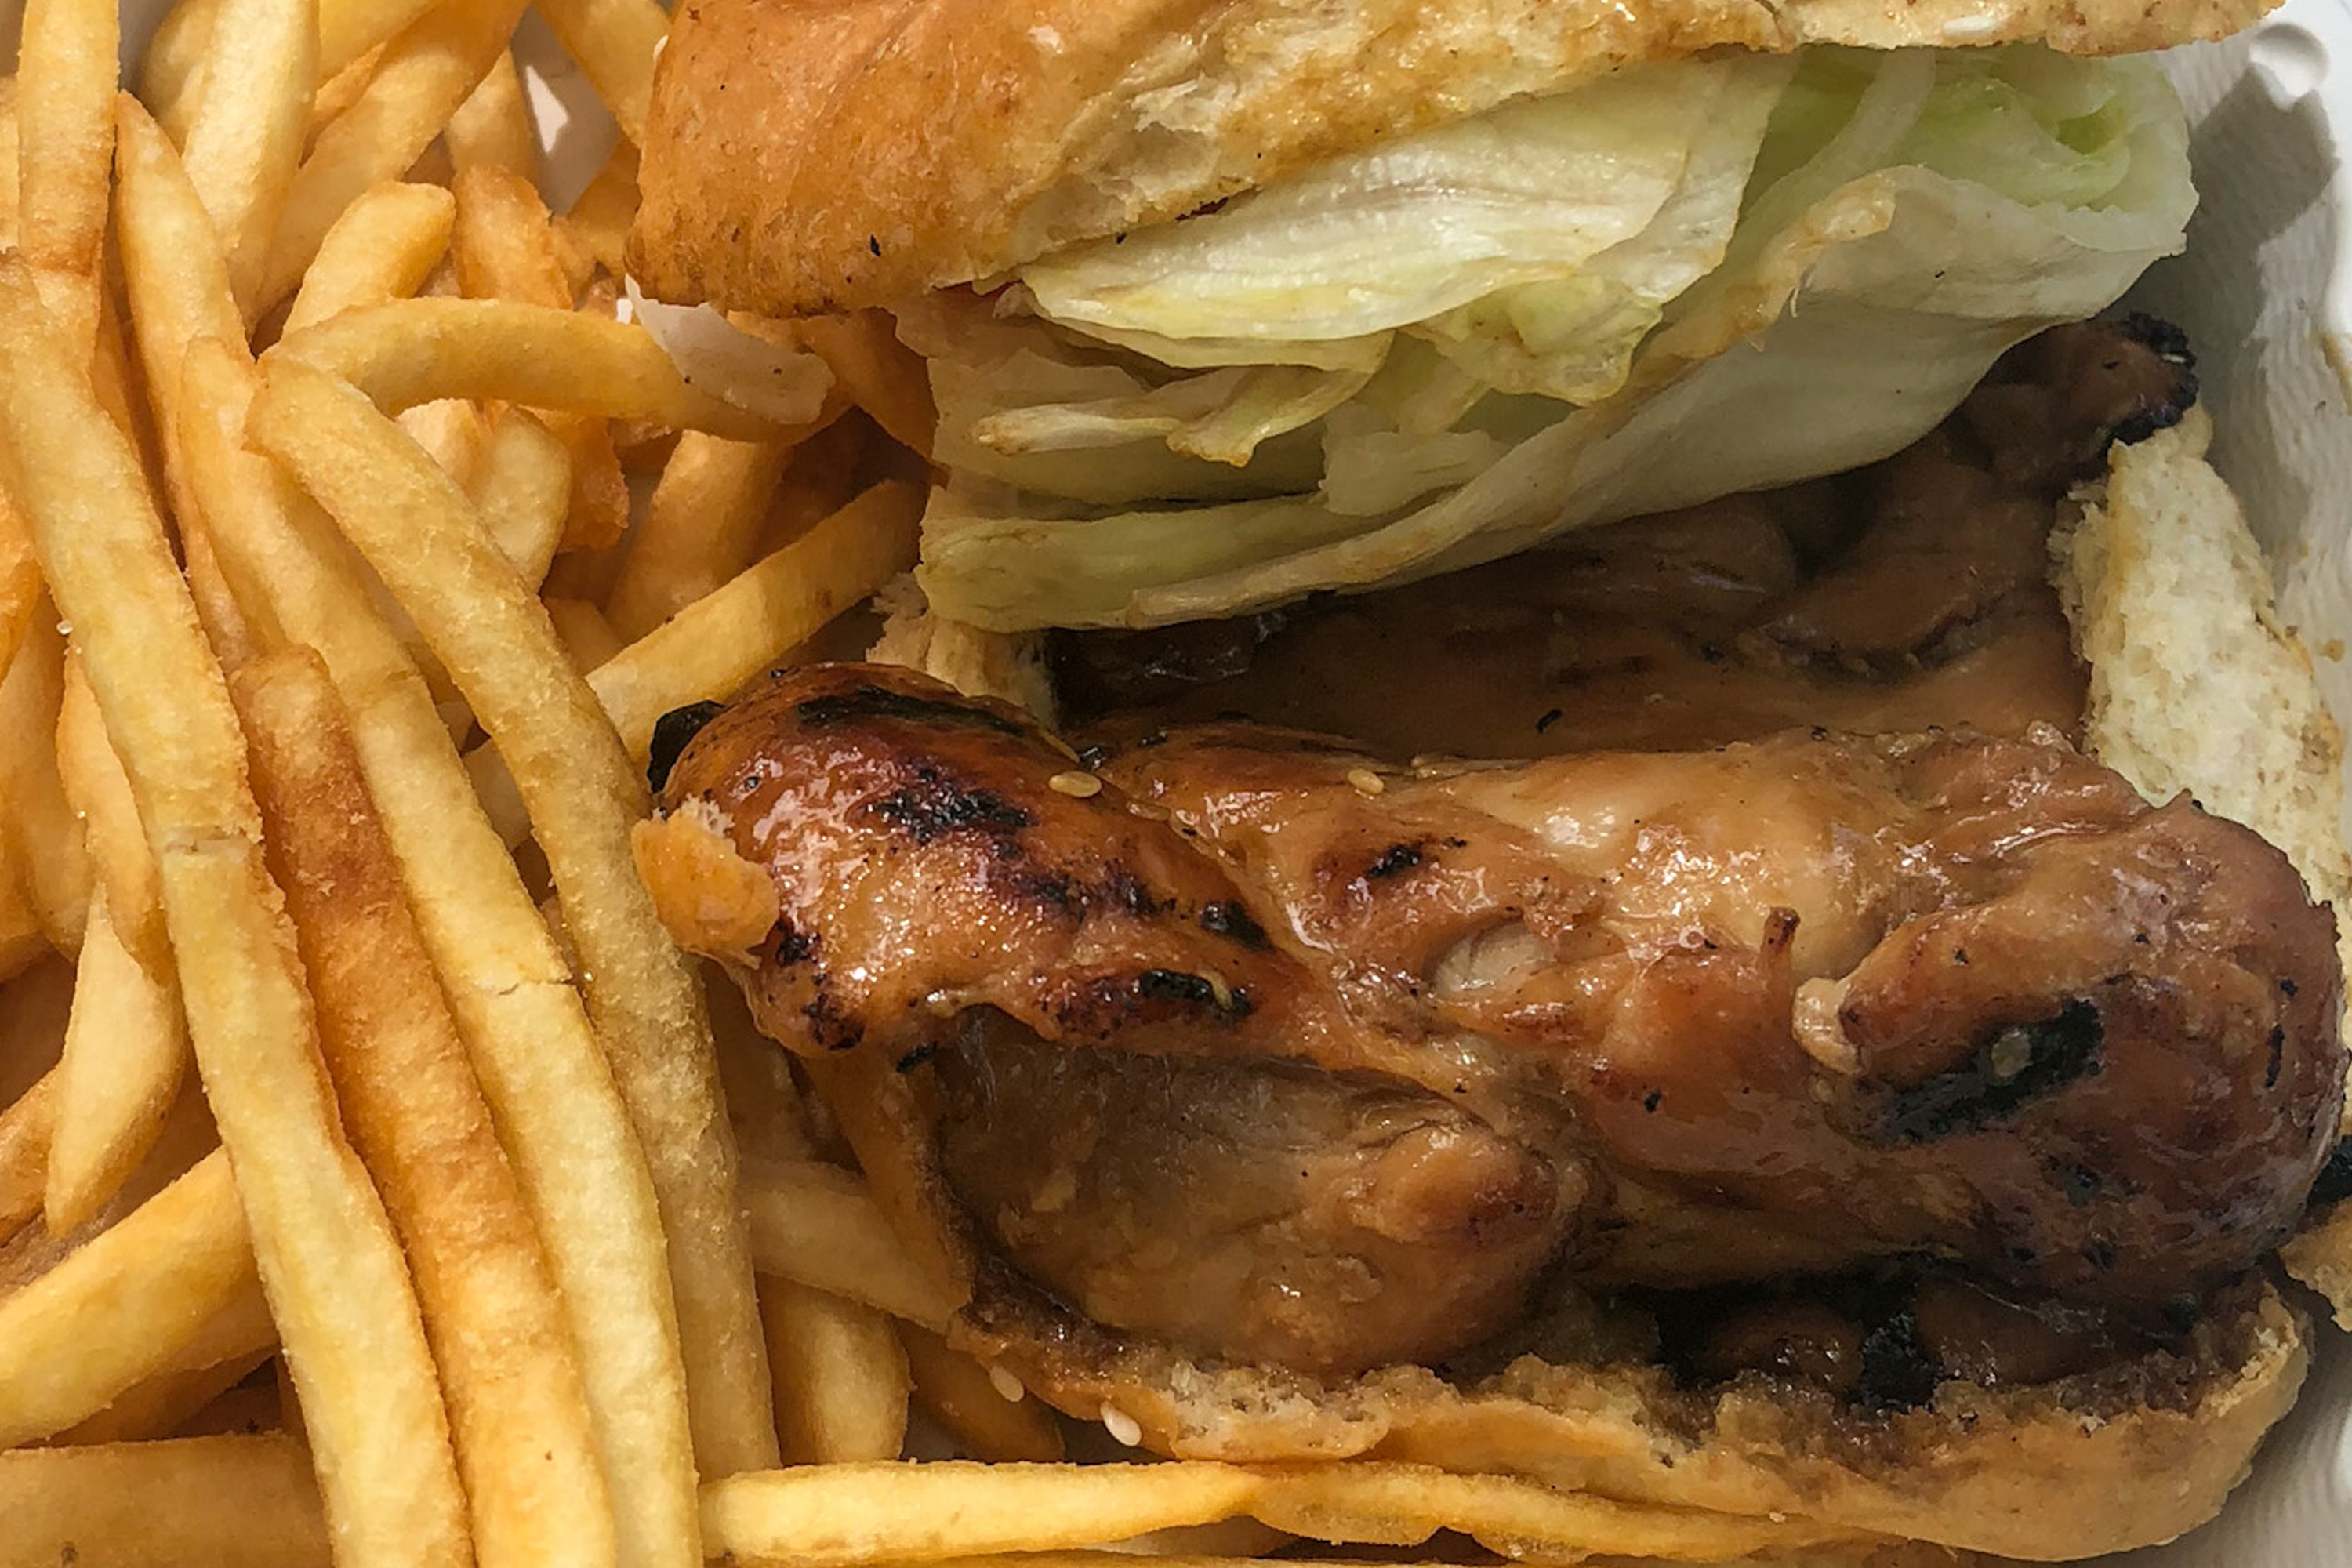 Teriyaki Chicken Sandwich Lunch from Ted's Bakery on Oahu's North Shore - best lunch spots for Hawaii foodies